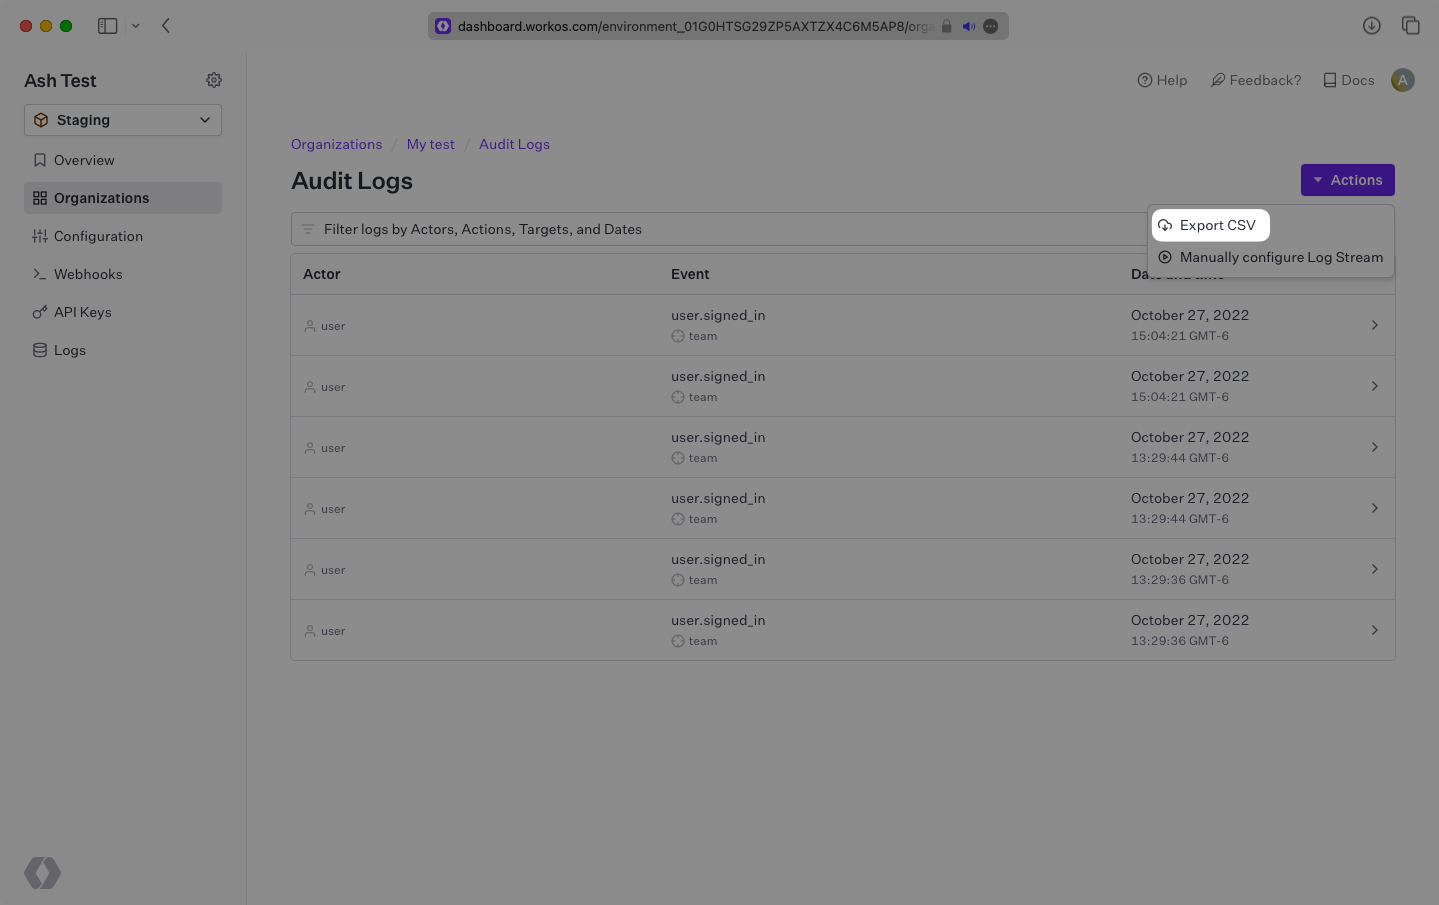 A screenshot showing how to generate an Audit Log export in the WorkOS Dashboard.